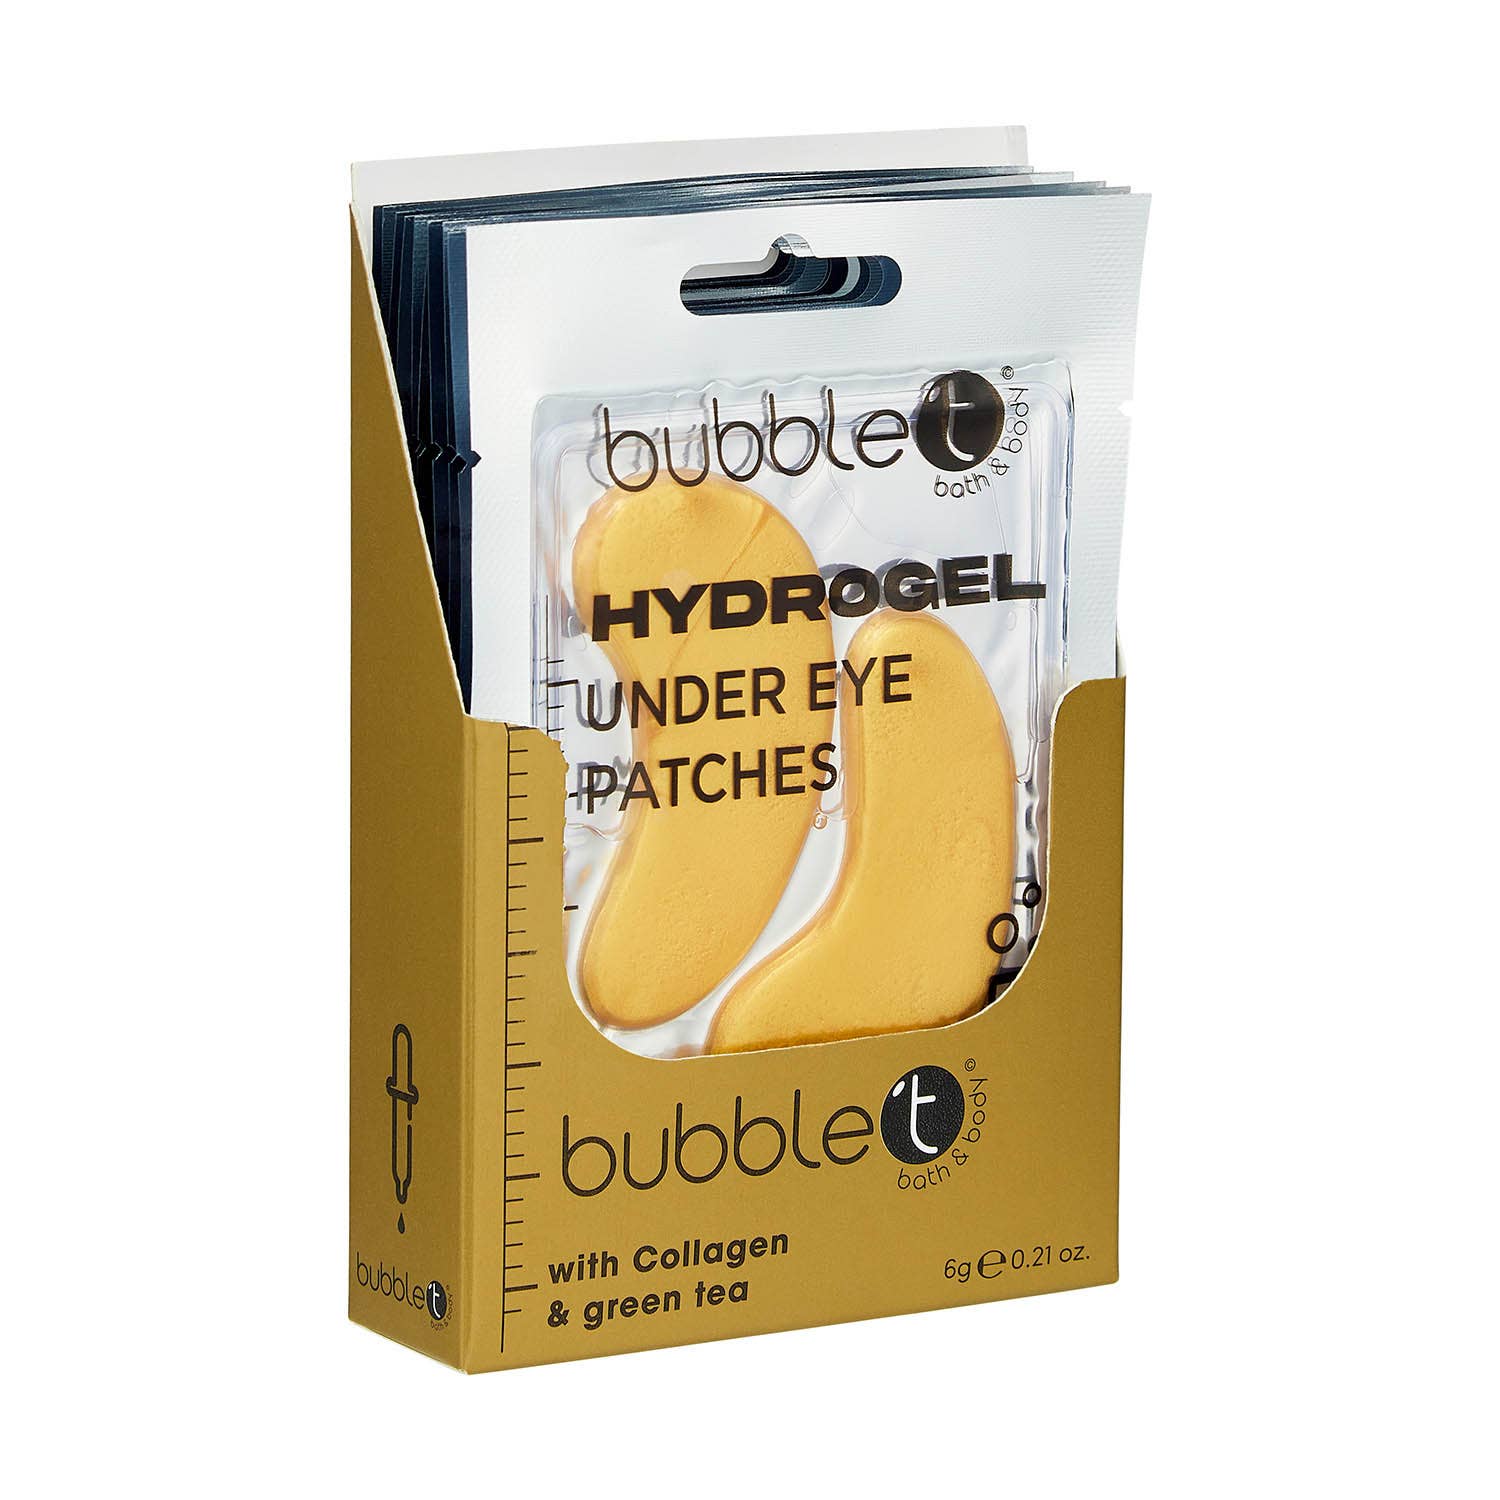 Hydrogel Under Eye Patches - Collagen & Green Tea - Time's Reel